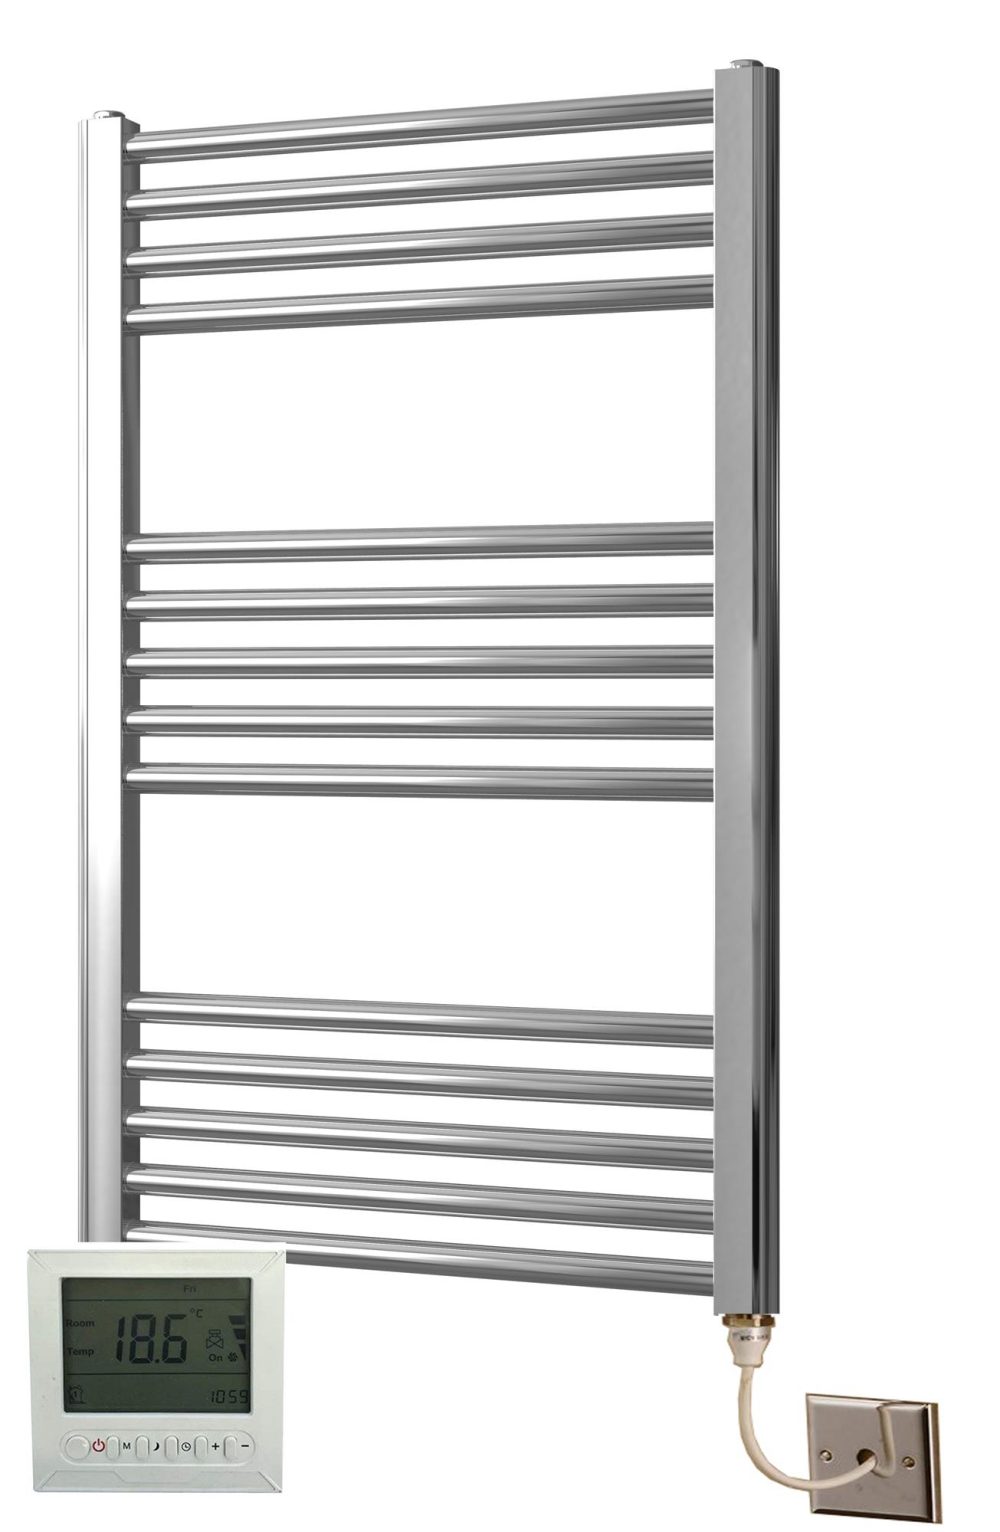 York Chrome Electric Towel Rail Curved 600 x 1800mm with Bidex Controller